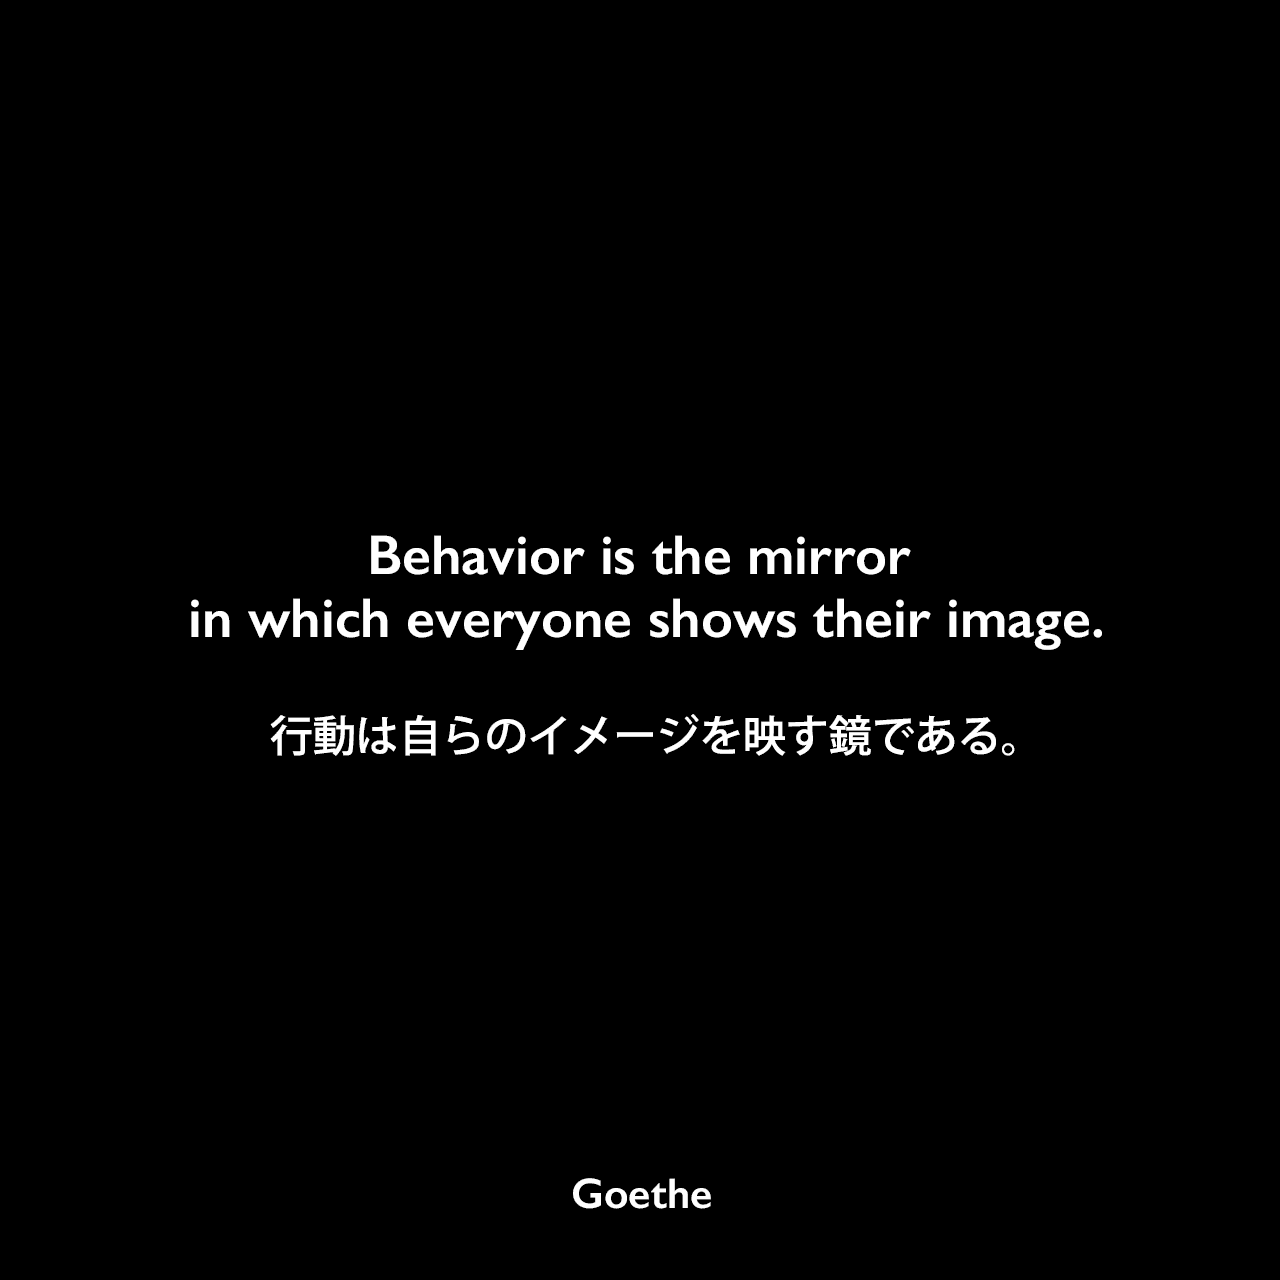 Behavior is the mirror in which everyone shows their image.行動は自らのイメージを映す鏡である。